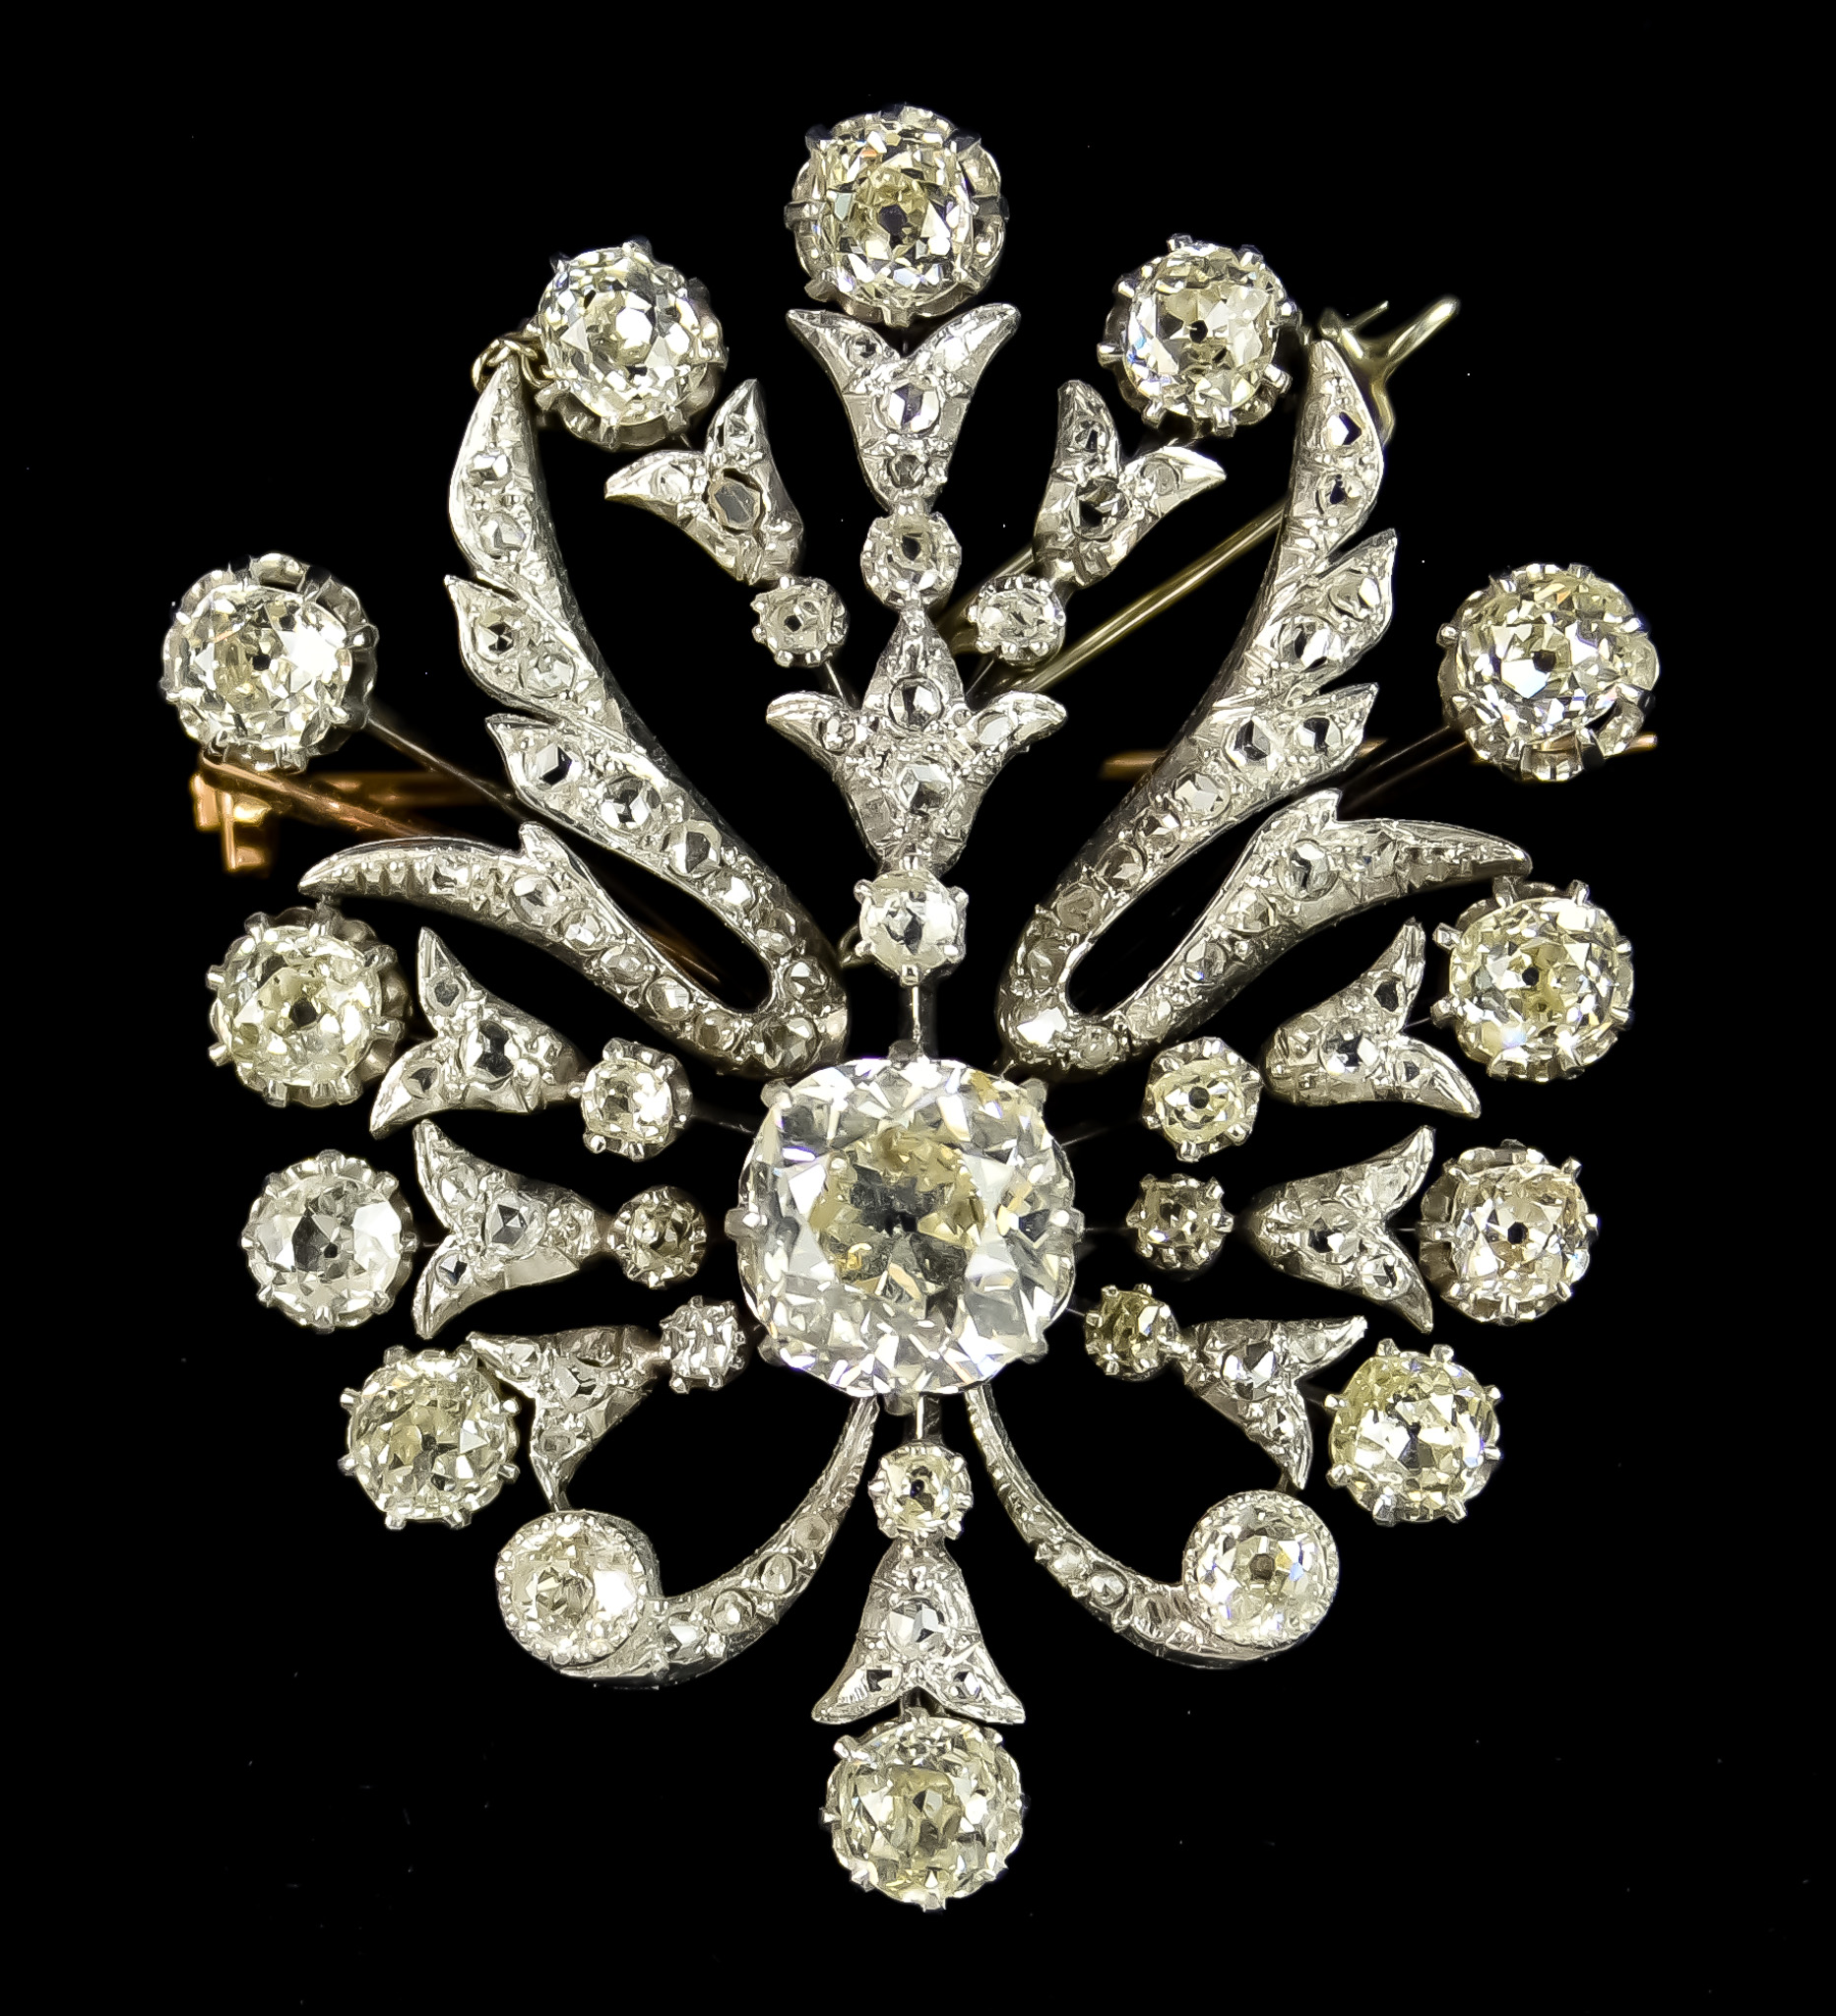 A Diamond Brooch, Late 19th/Early 20th Century, set with a centre old European cut diamond,